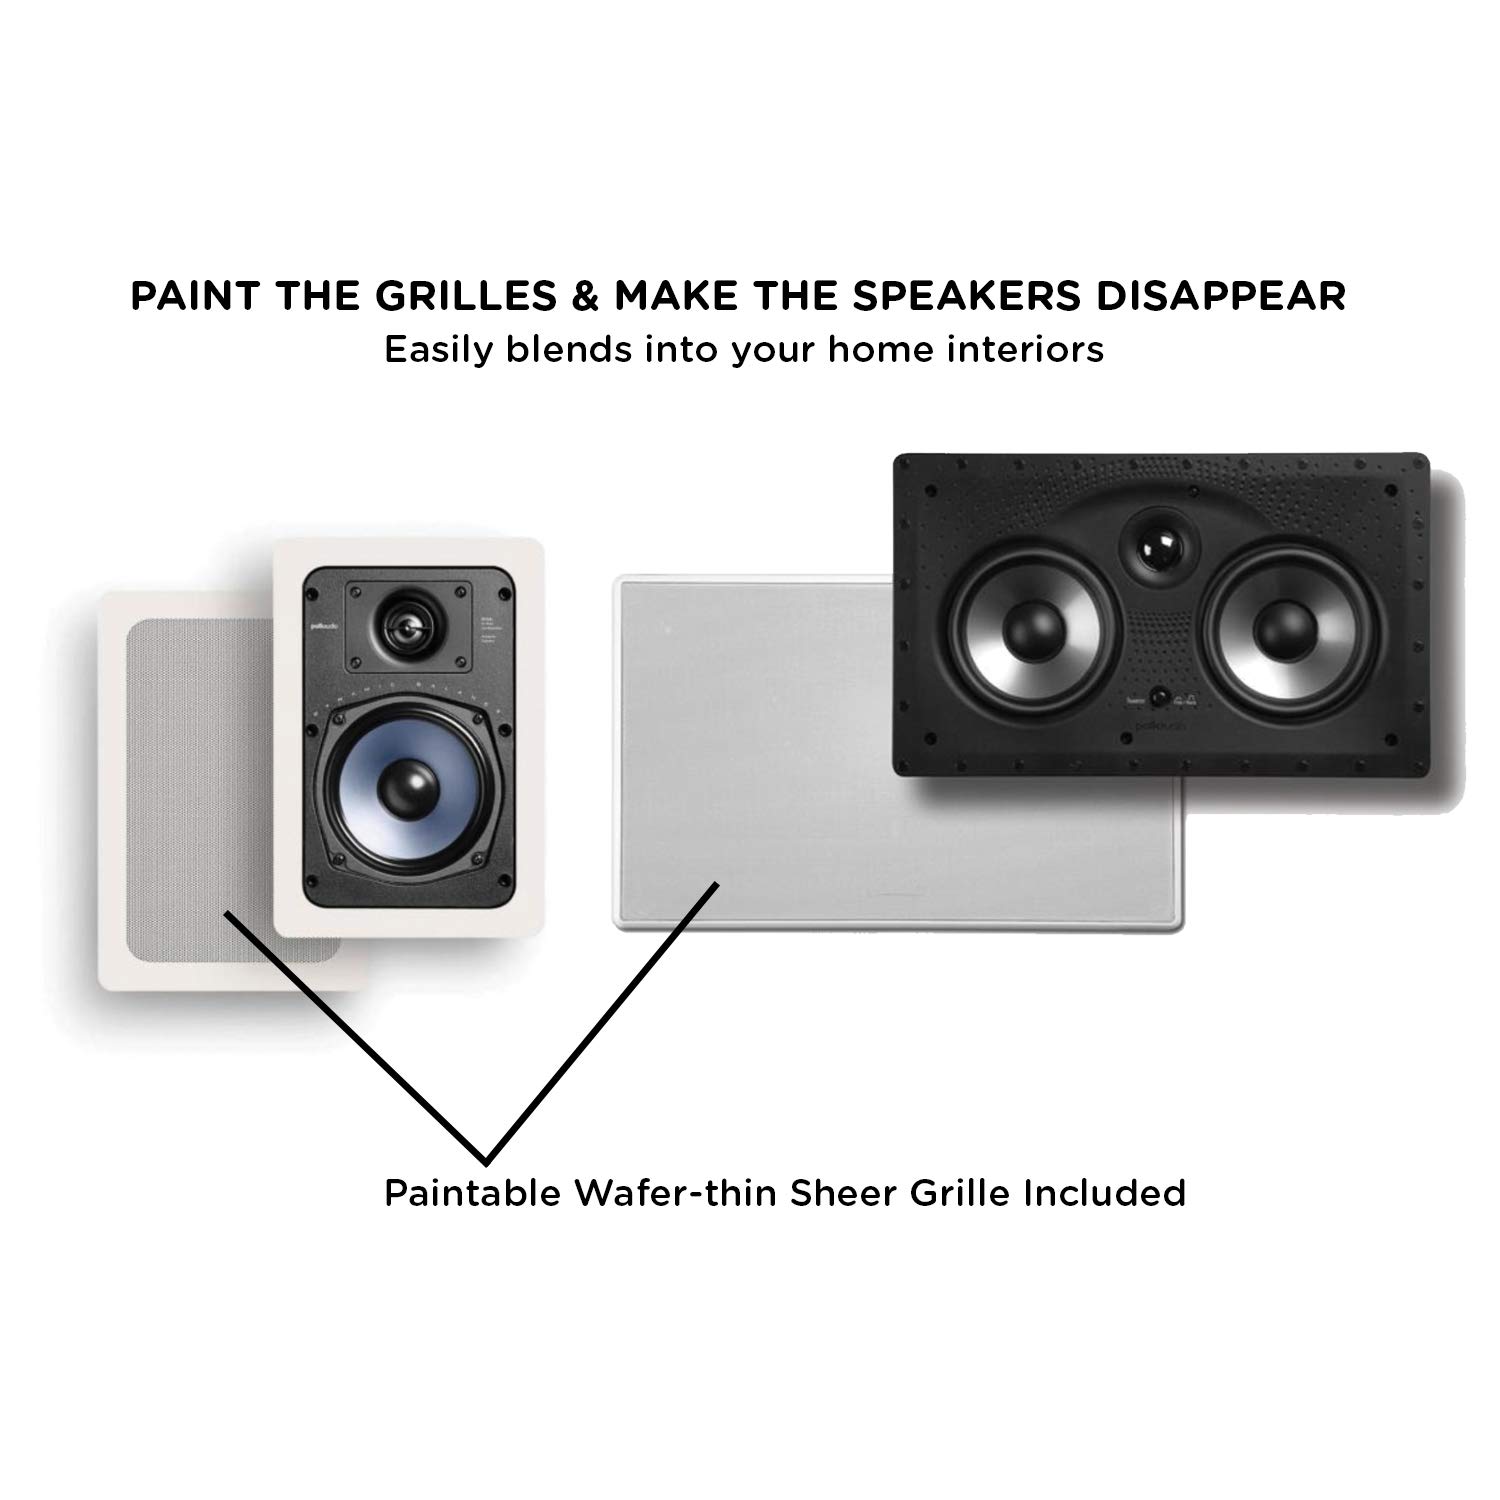 Polk Audio RC55i 2-way 5.25-inch In-wall Speakers (Pair) with 255C-RT Center Channel In-wall Speaker From The Vanishing Series | Easily Fits, Looks Minimal, Gives Out Great Sound | Paintable Grille